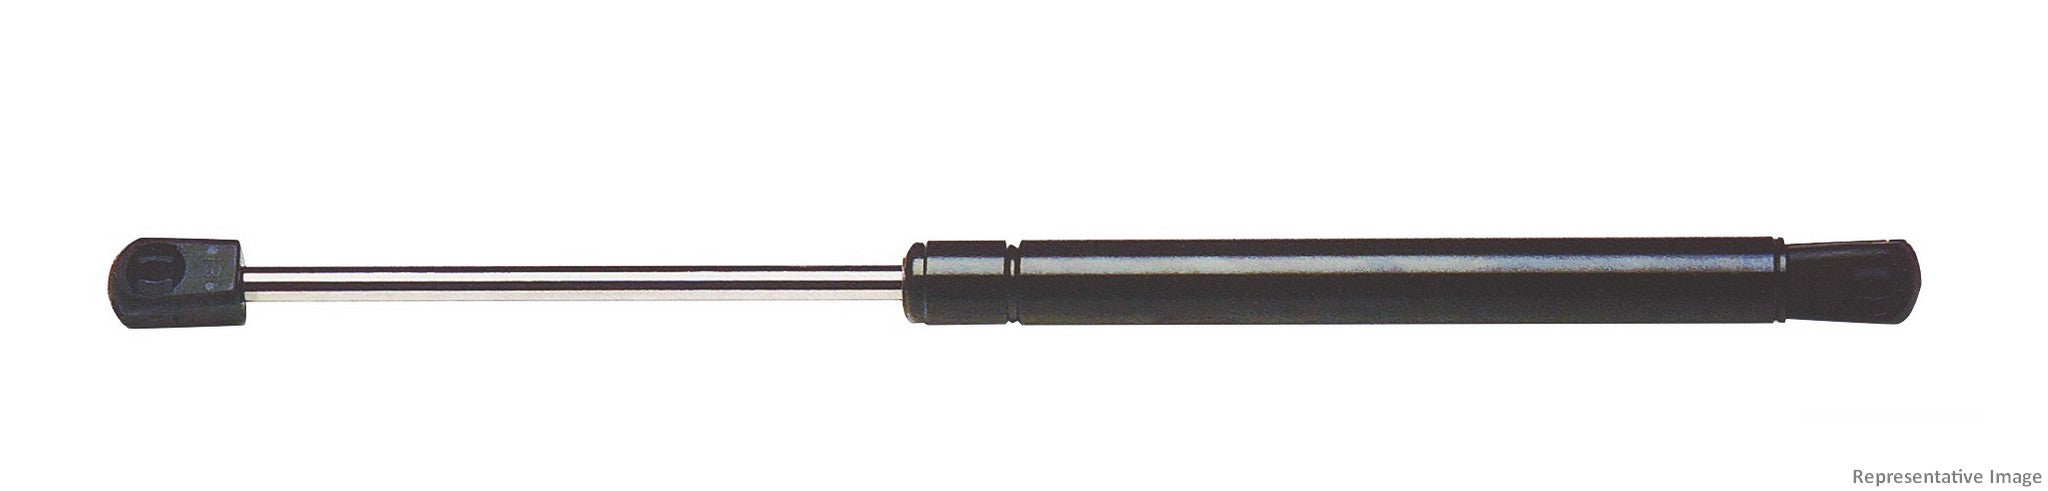 Right Hood Lift Support for Mercedes-Benz ML350 2011 2010 2009 2008 2007 2006 - Rhino Pac 7164R